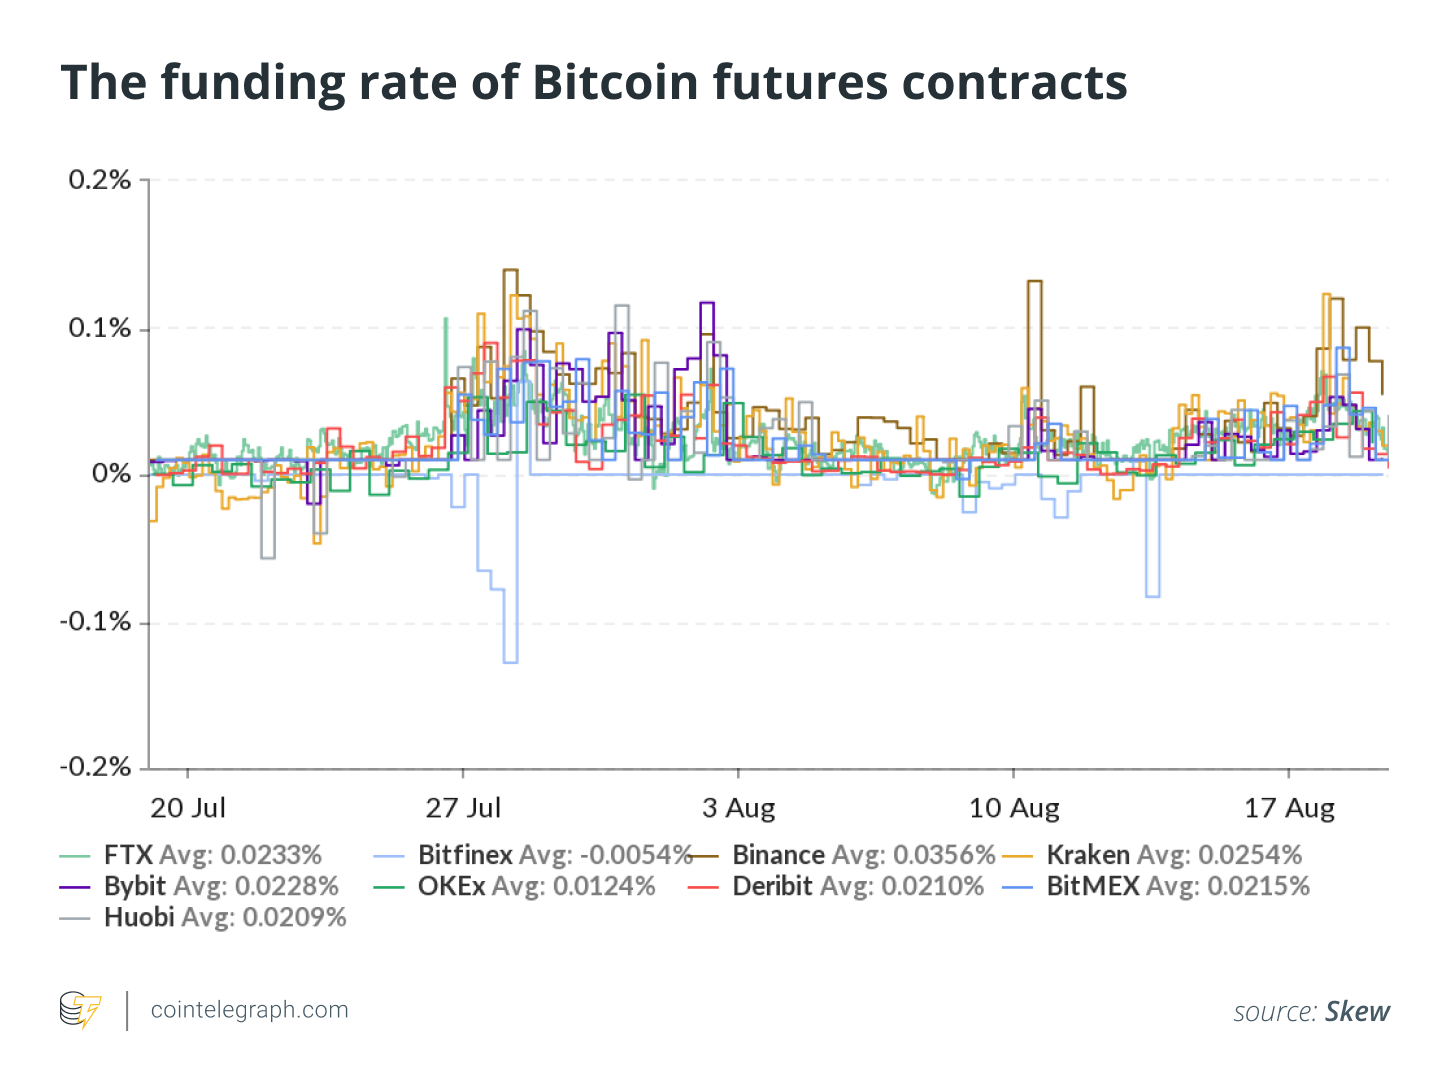 The funding rate of Bitcoin futures contracts